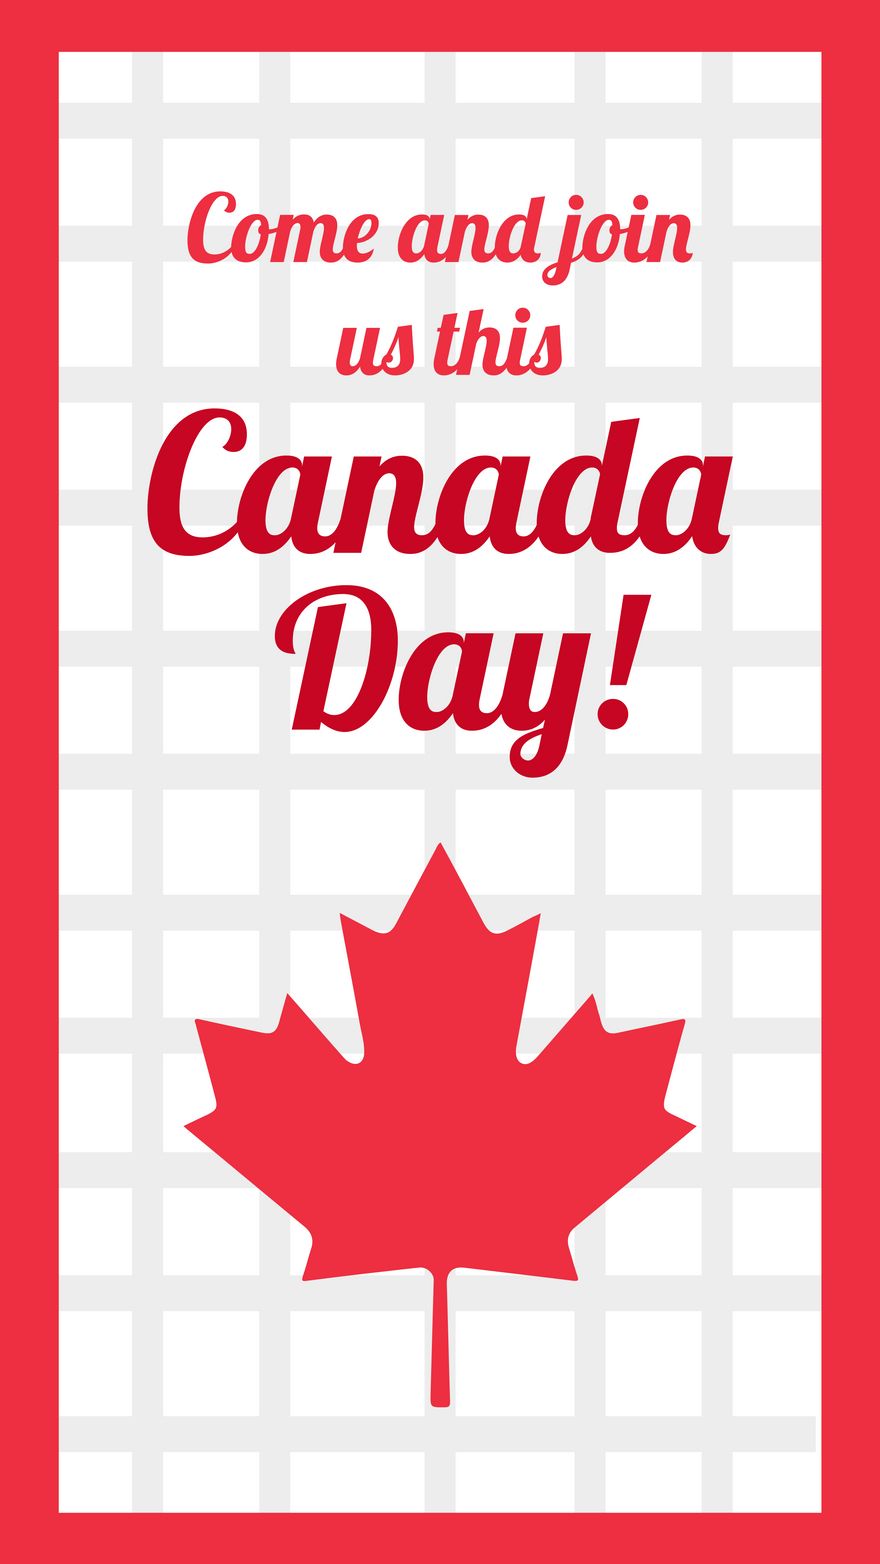 Free Canada Day Invitation Background in PDF, Illustrator, PSD, EPS, SVG, JPG, PNG